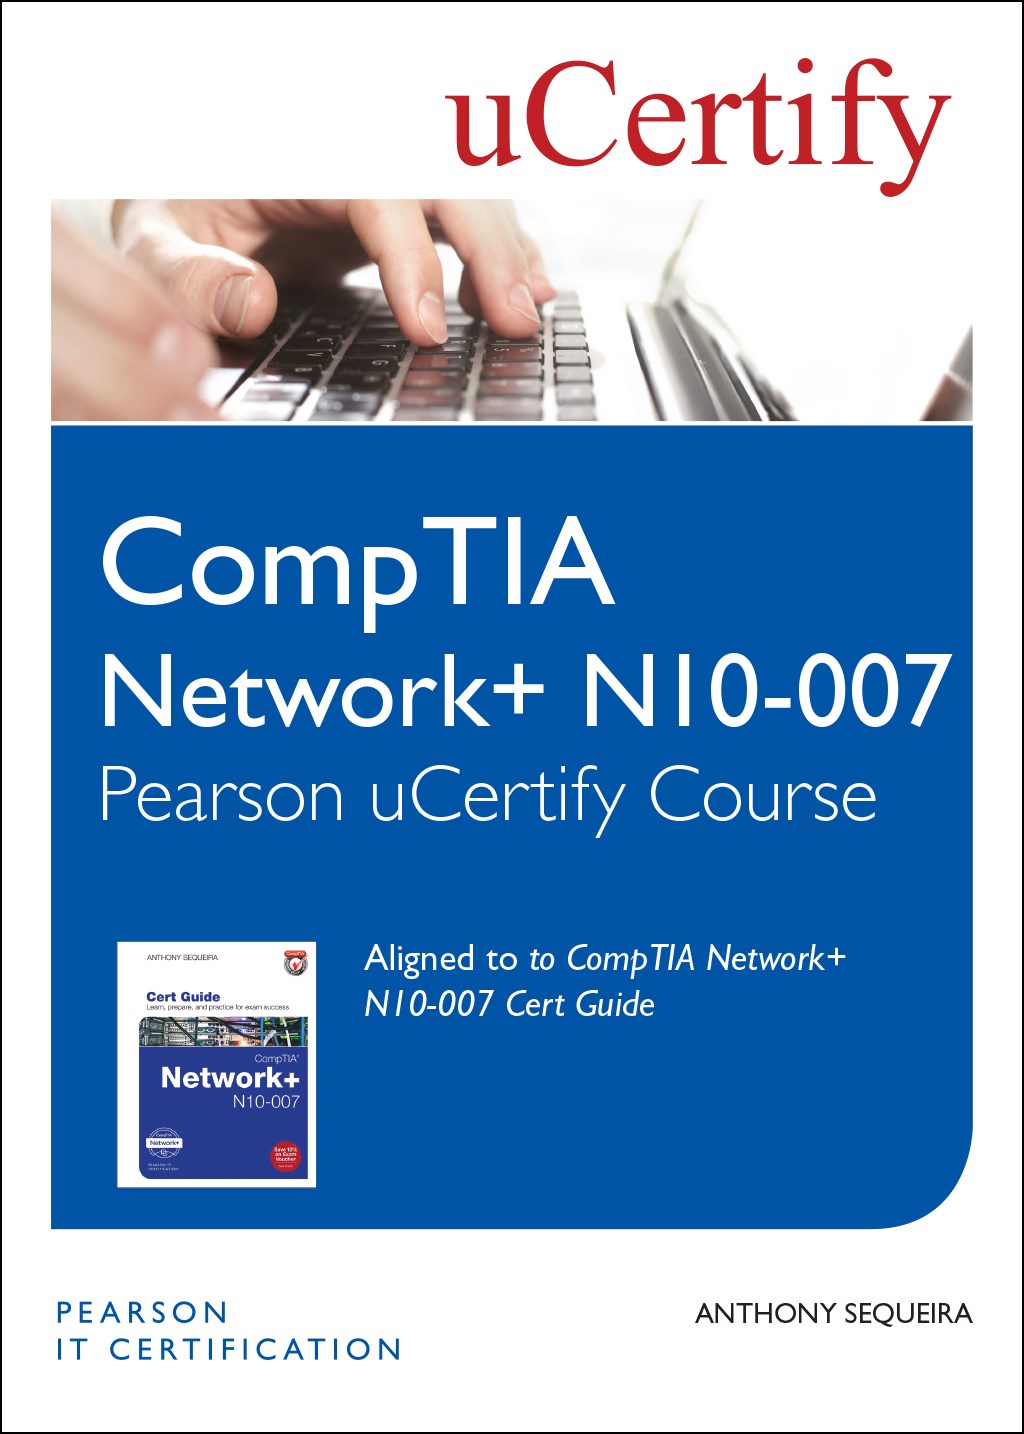 CompTIA Network+ N10-007 Pearson uCertify Course Student Access Card